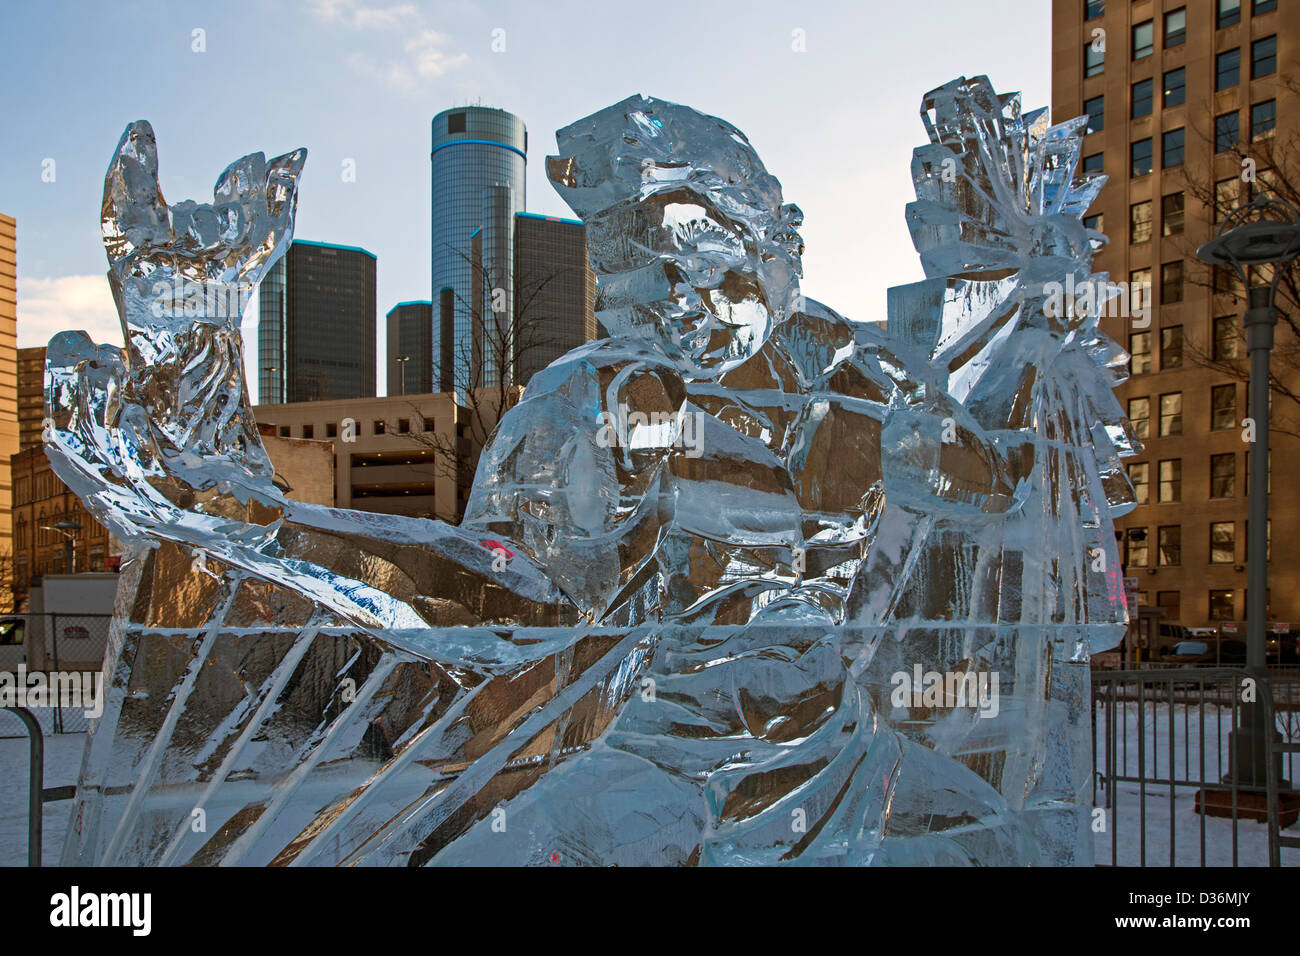 Detroit, Michigan - Ice sculpture at Winter Blast, the city's annual downtown winter festival. Stock Photo